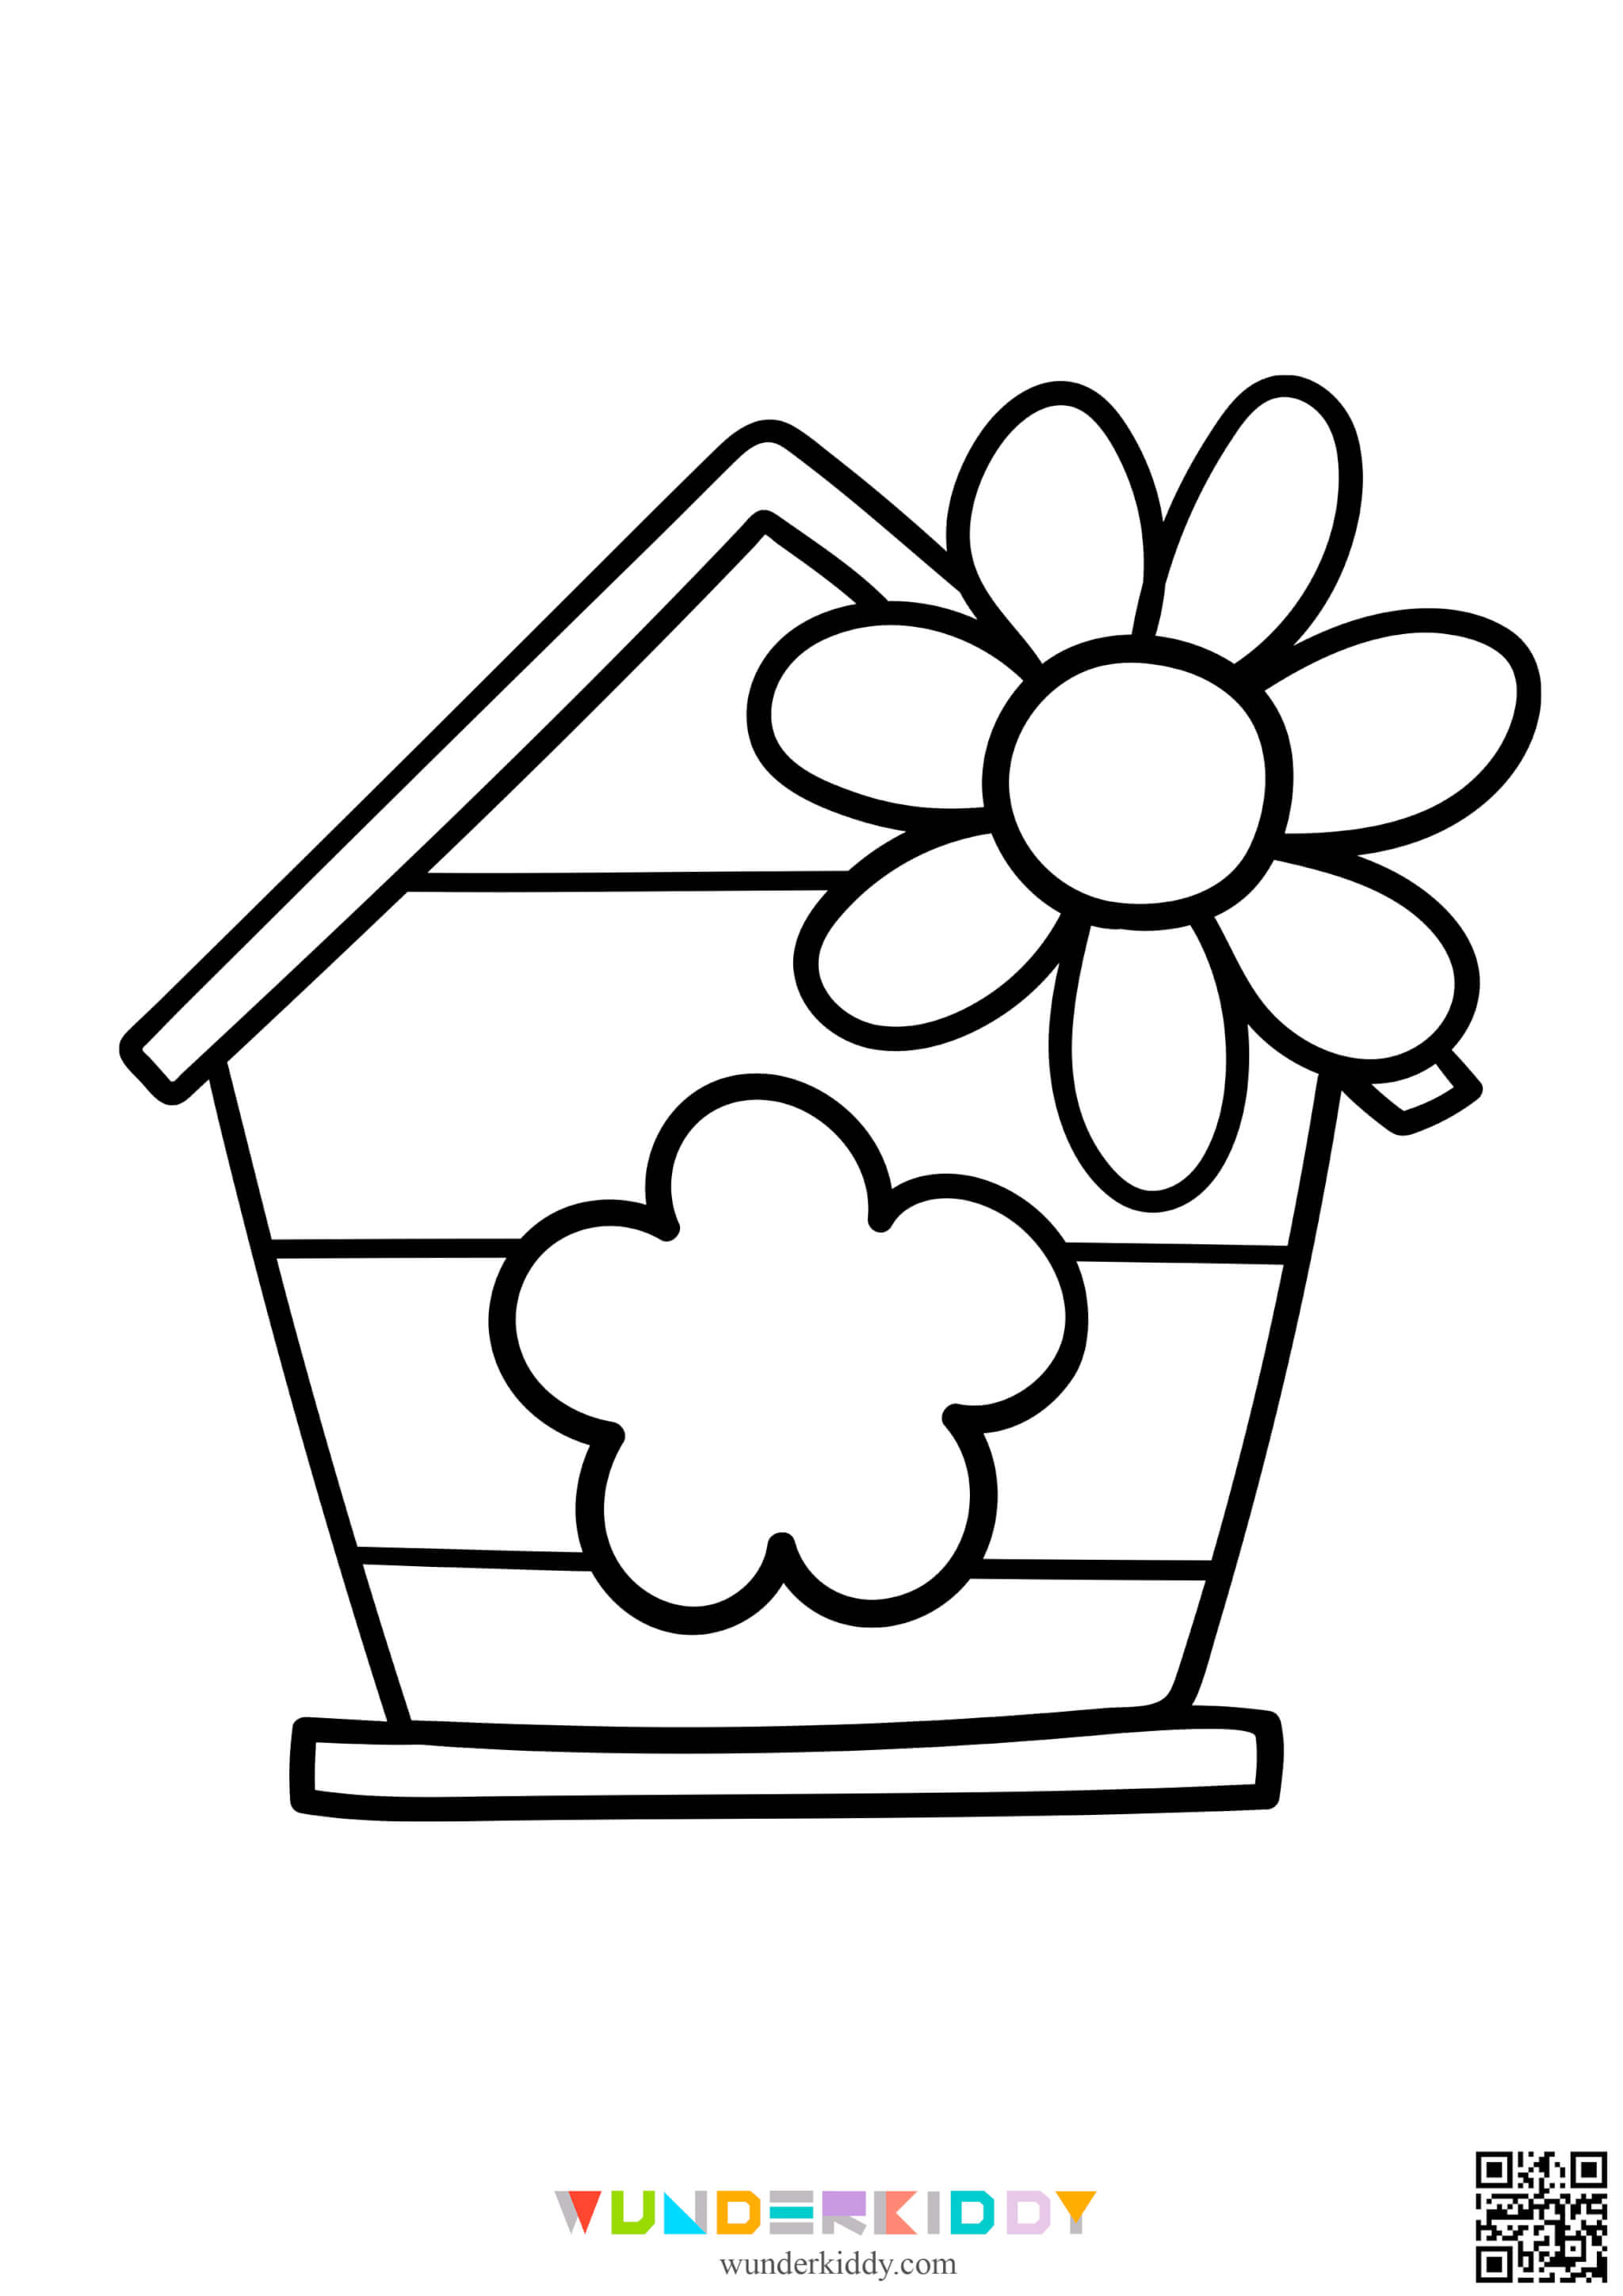 Spring Coloring Pages - Image 4